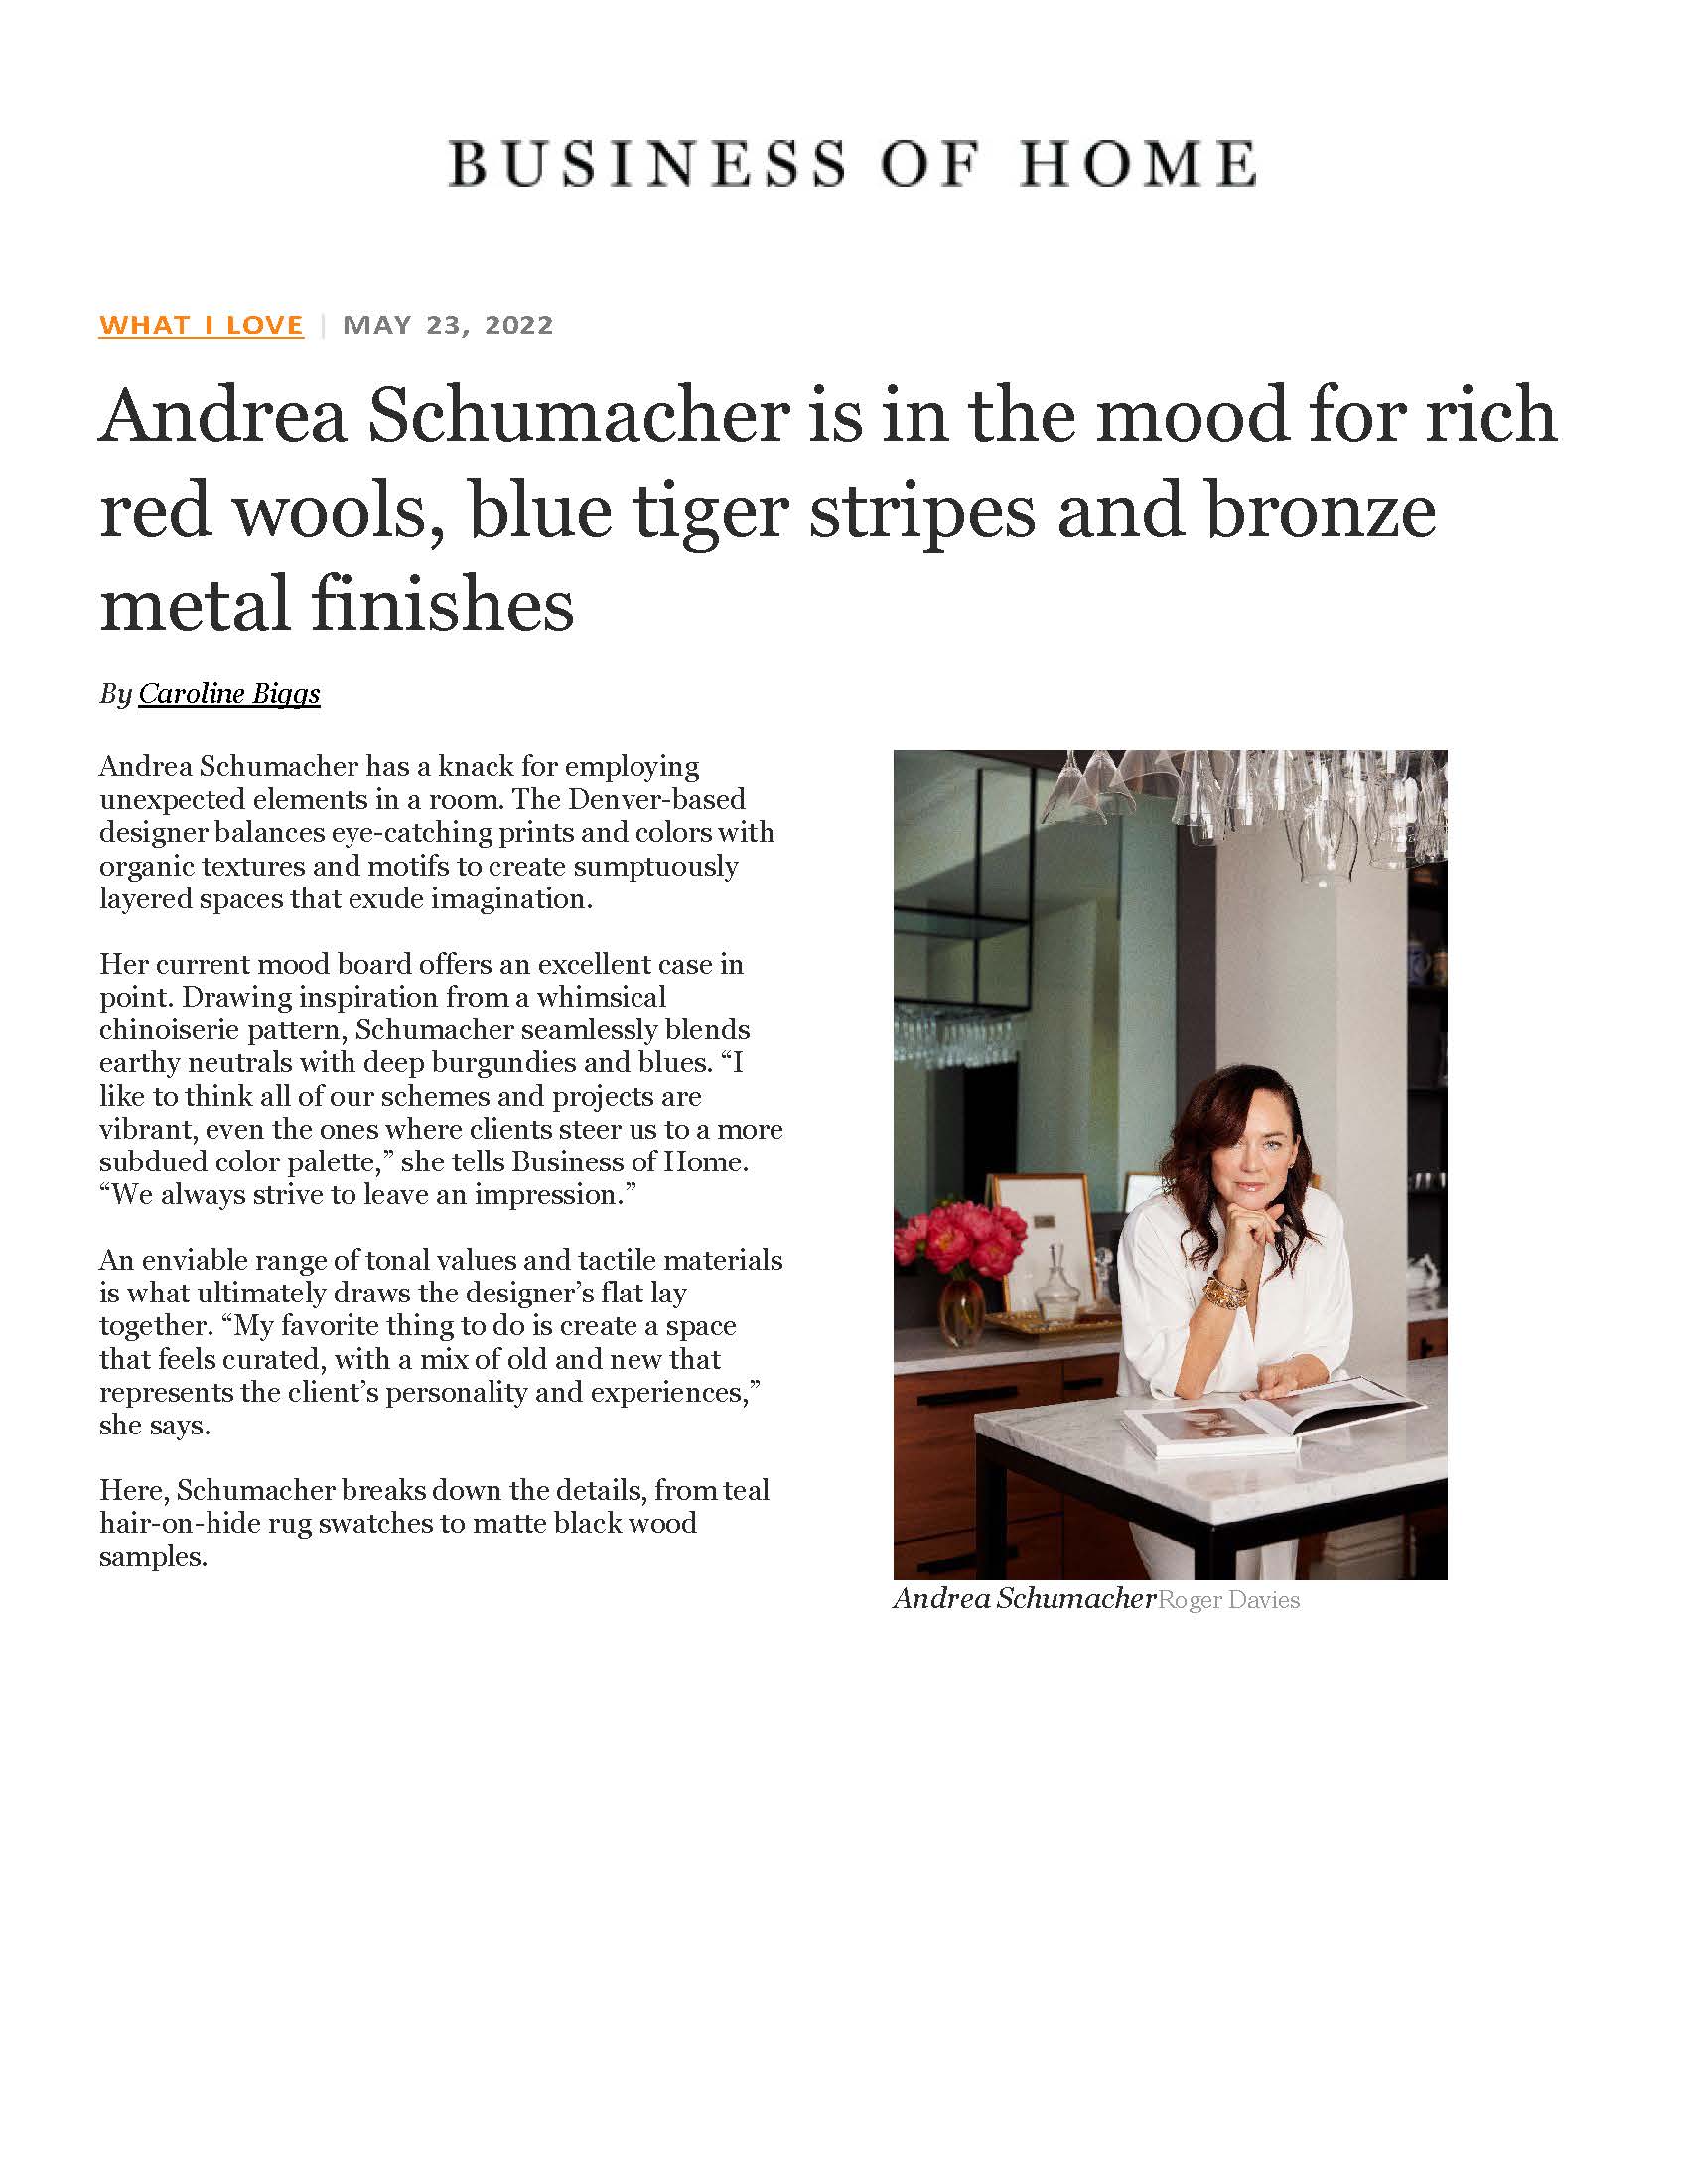 Andrea Schumacher Interiors featured in Business of Home